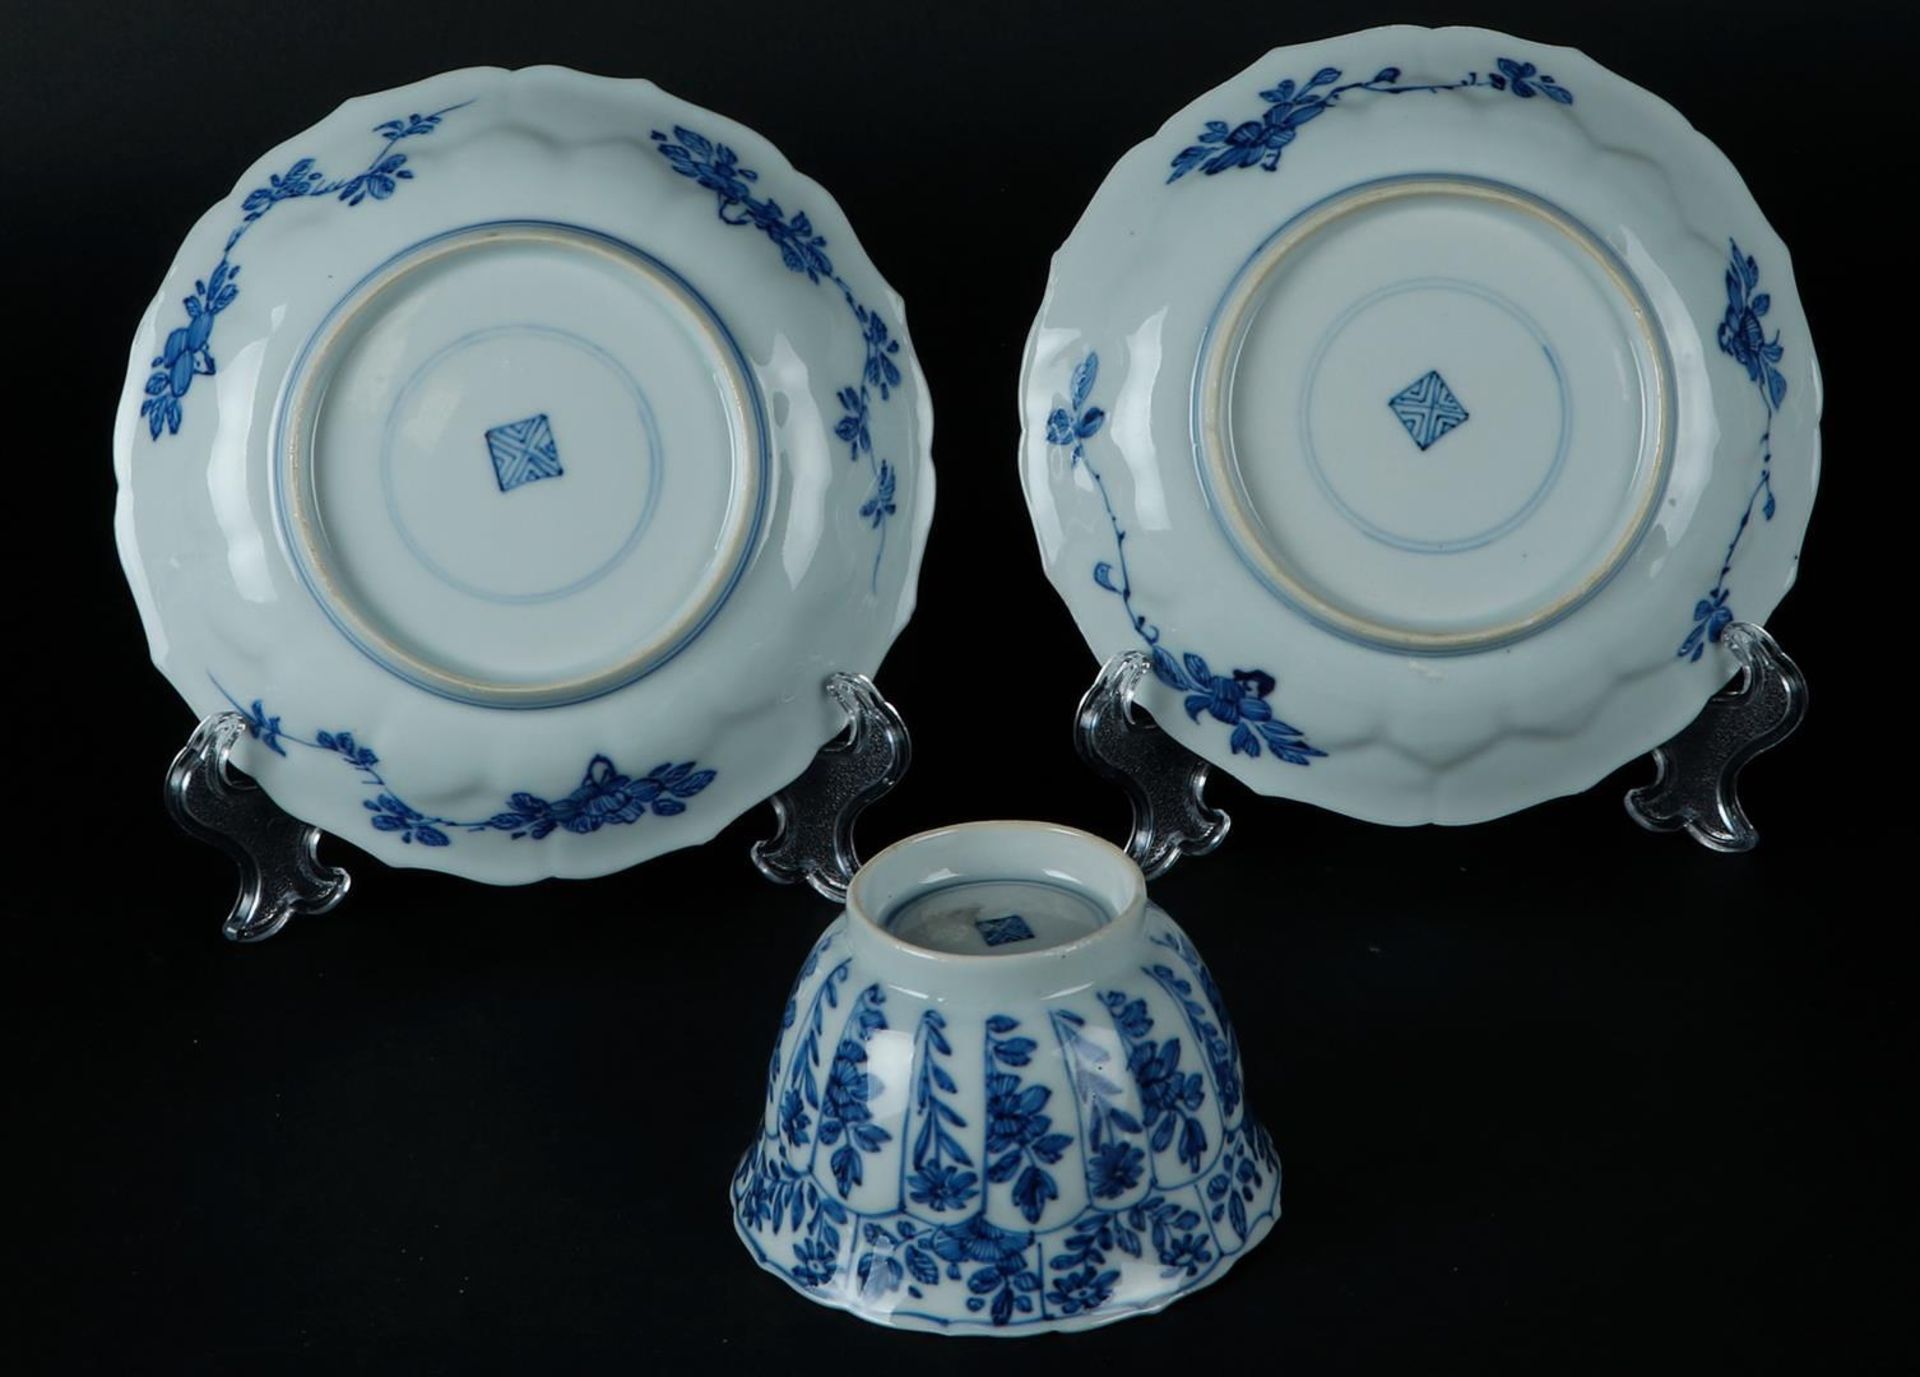 Two porcelain plates and bowl with lotus leaf shaped outer beds in relief with floral decor, center  - Image 2 of 2